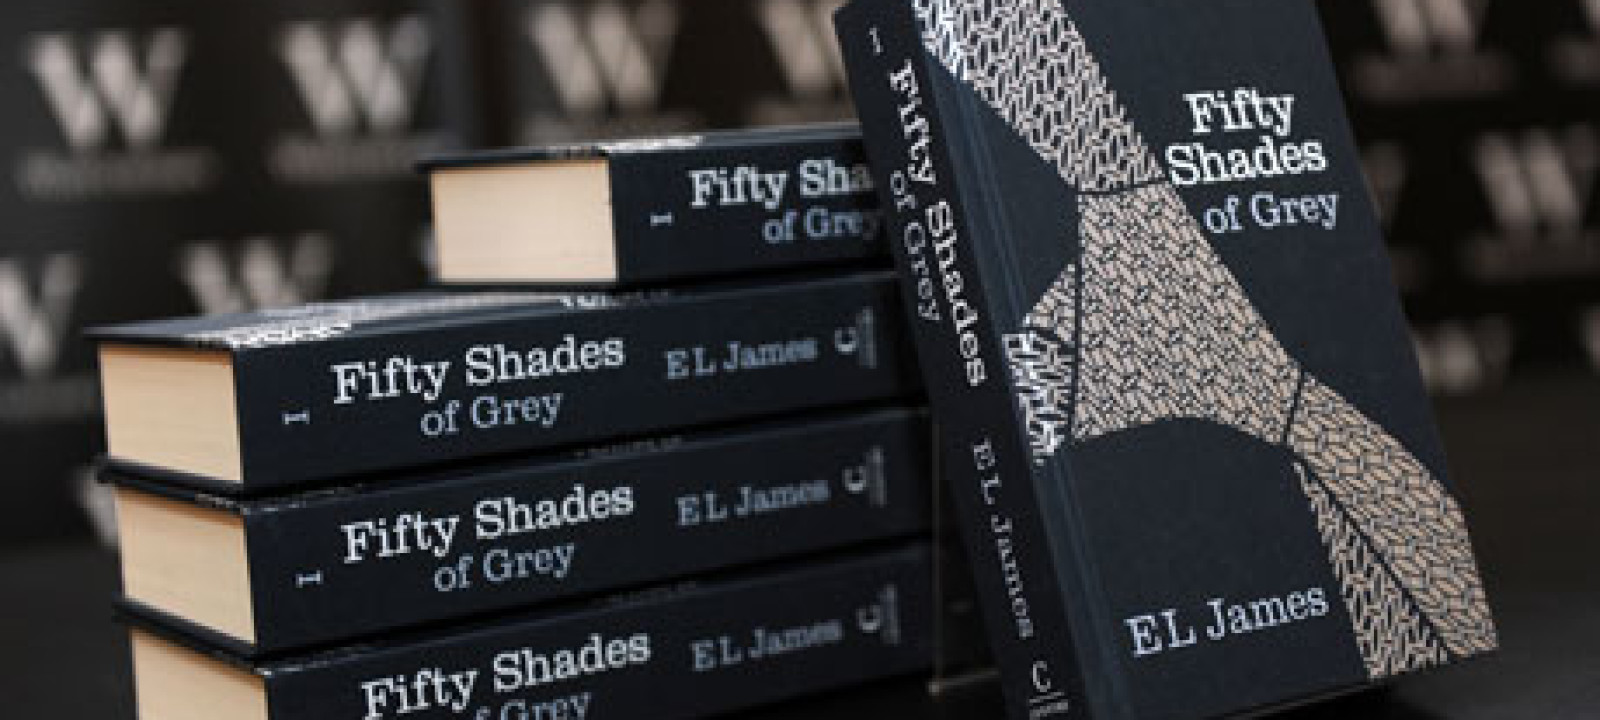 top rated books like 50 shades of grey